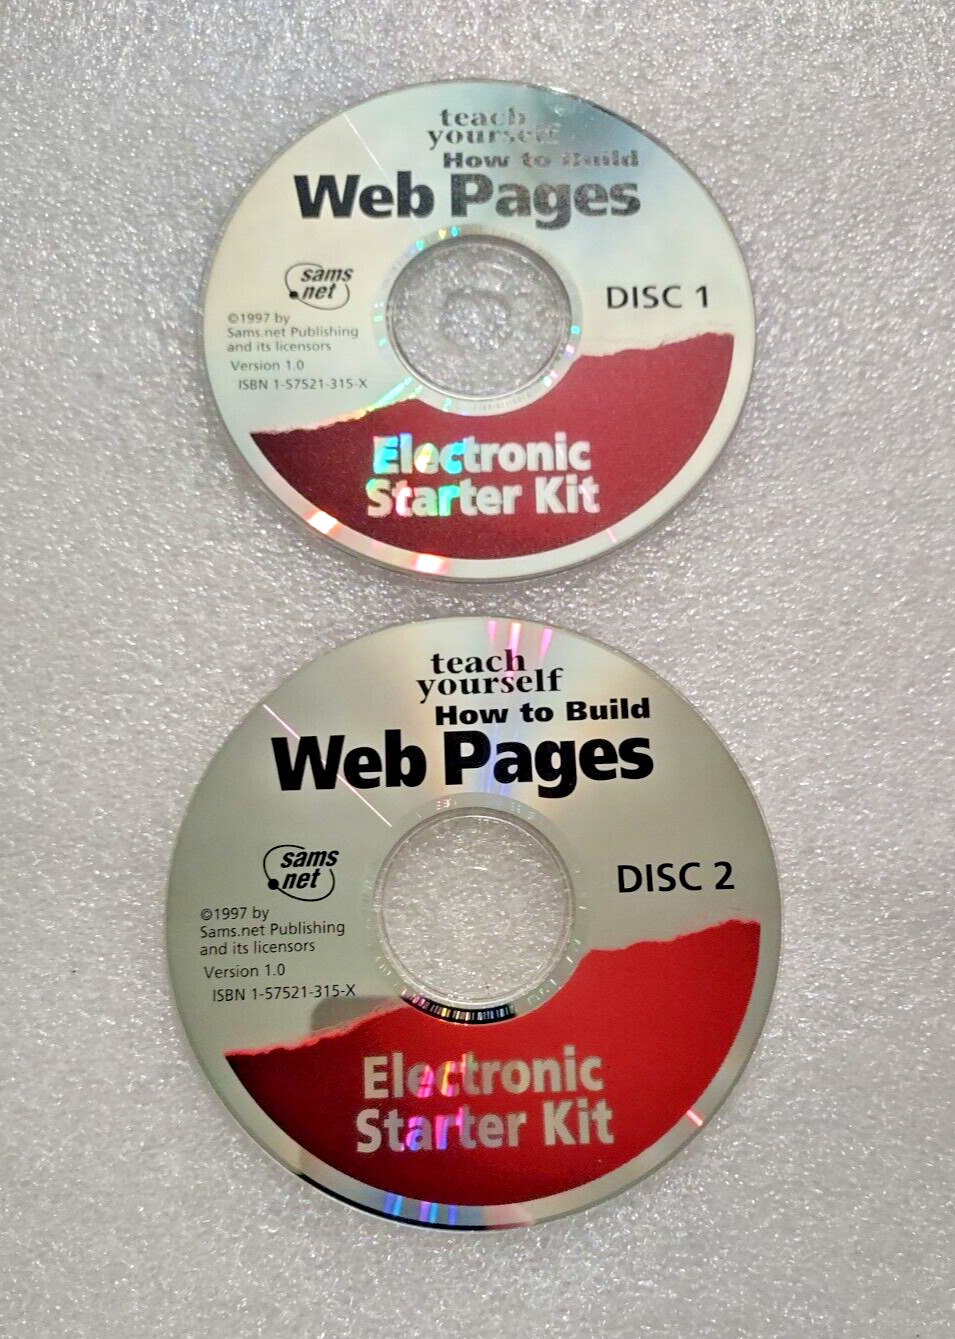 2 CD's teach yourself How to Build Web Pages Electronic Starter Kit by Sams.net 